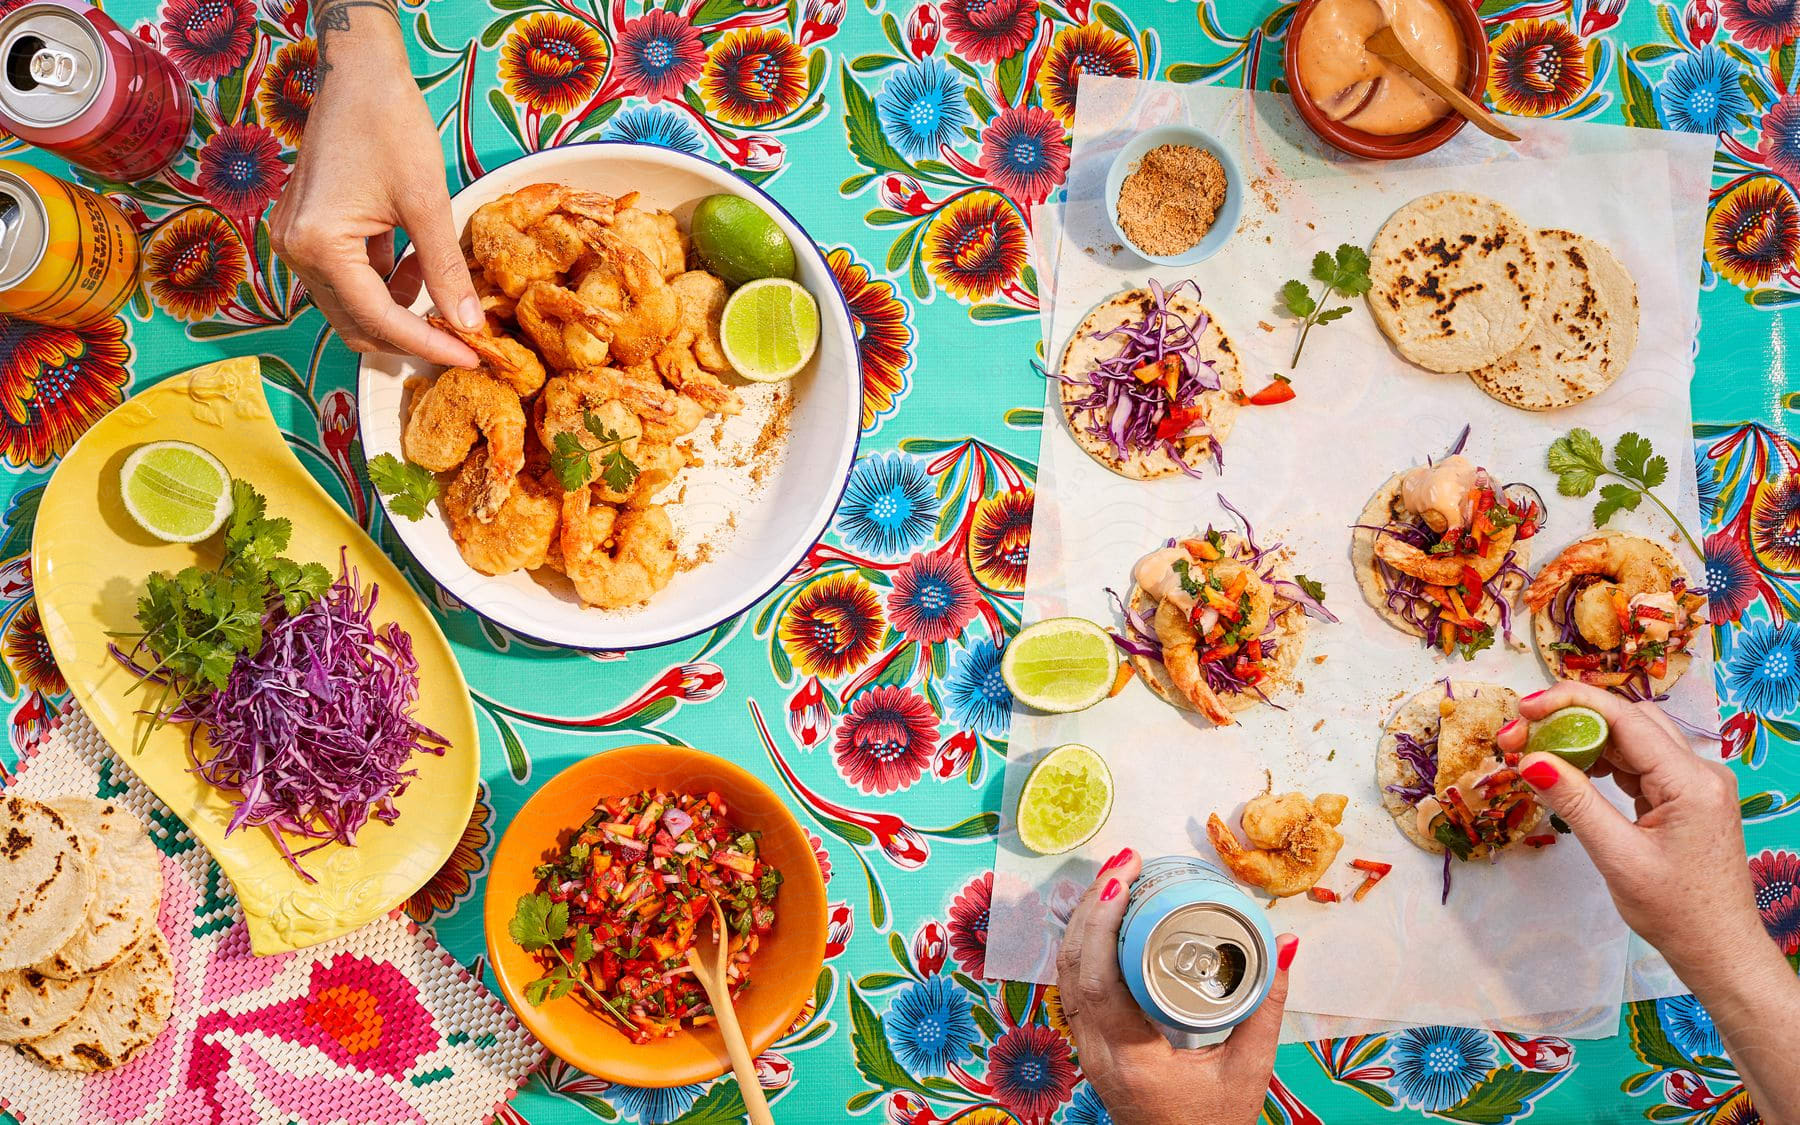 Colorful table spread with various Mexican dishes and hands serving and eating.